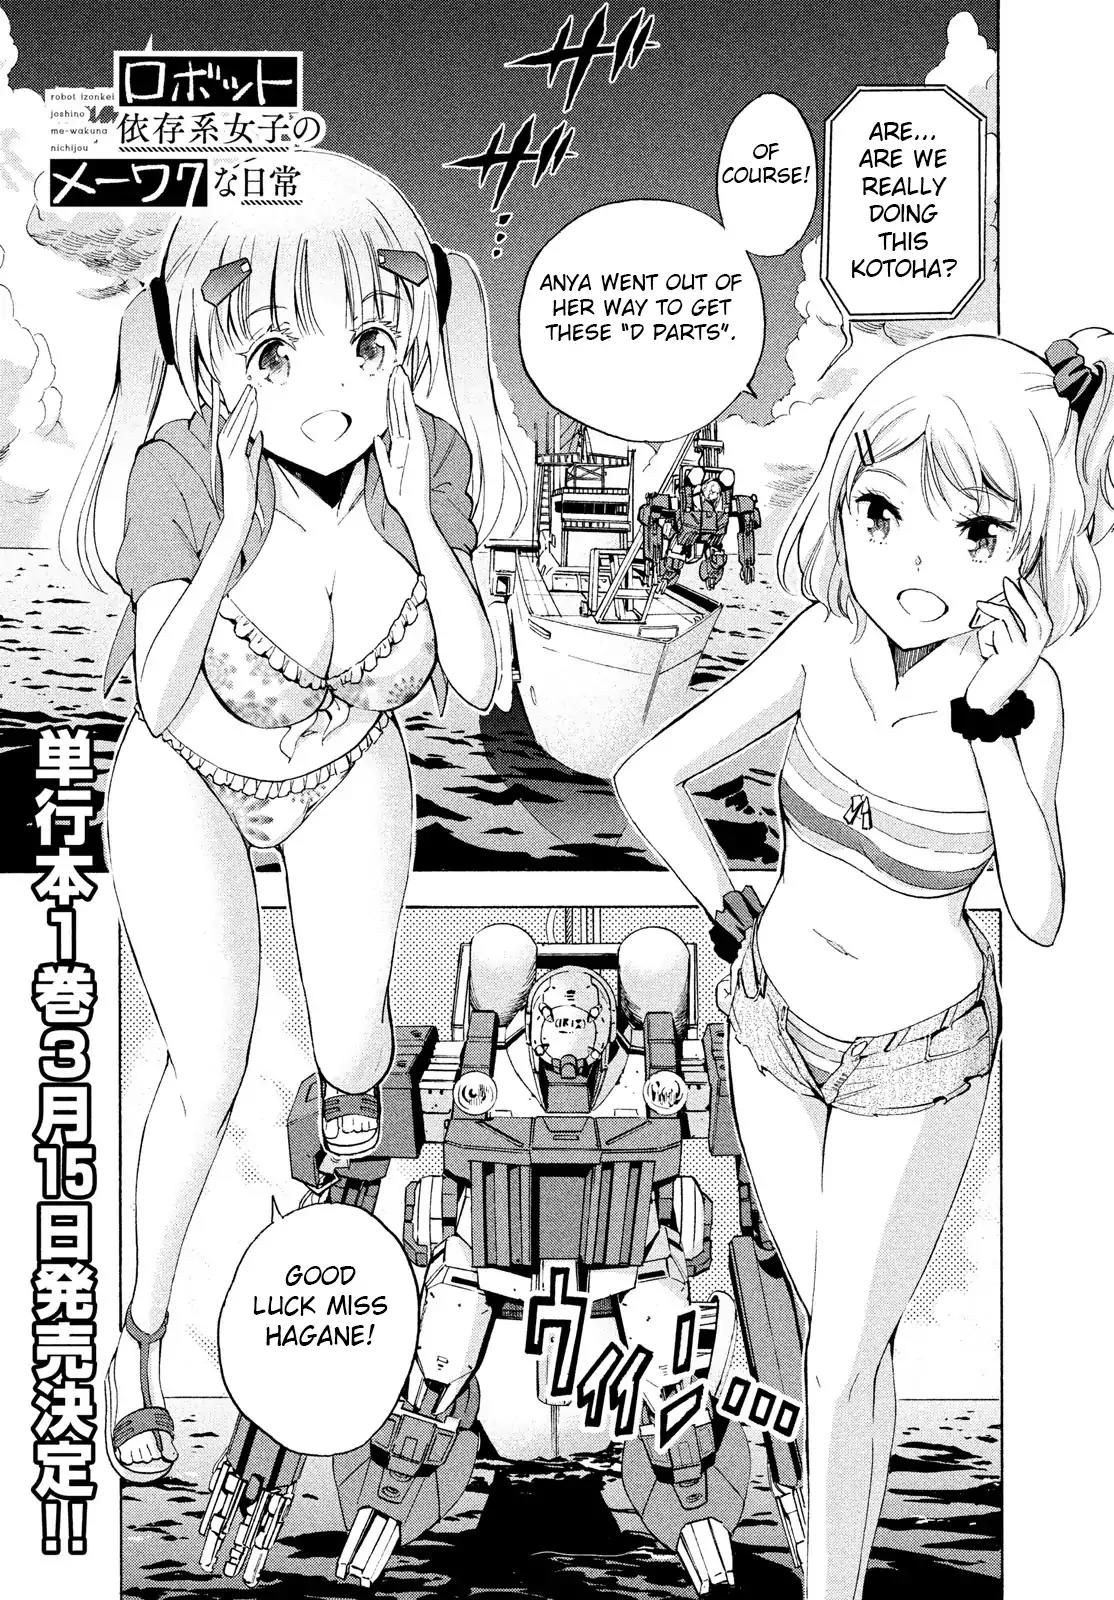 The Nuisance Daily Life of Robot-dependent Girl Vol.2 Chapter 6: